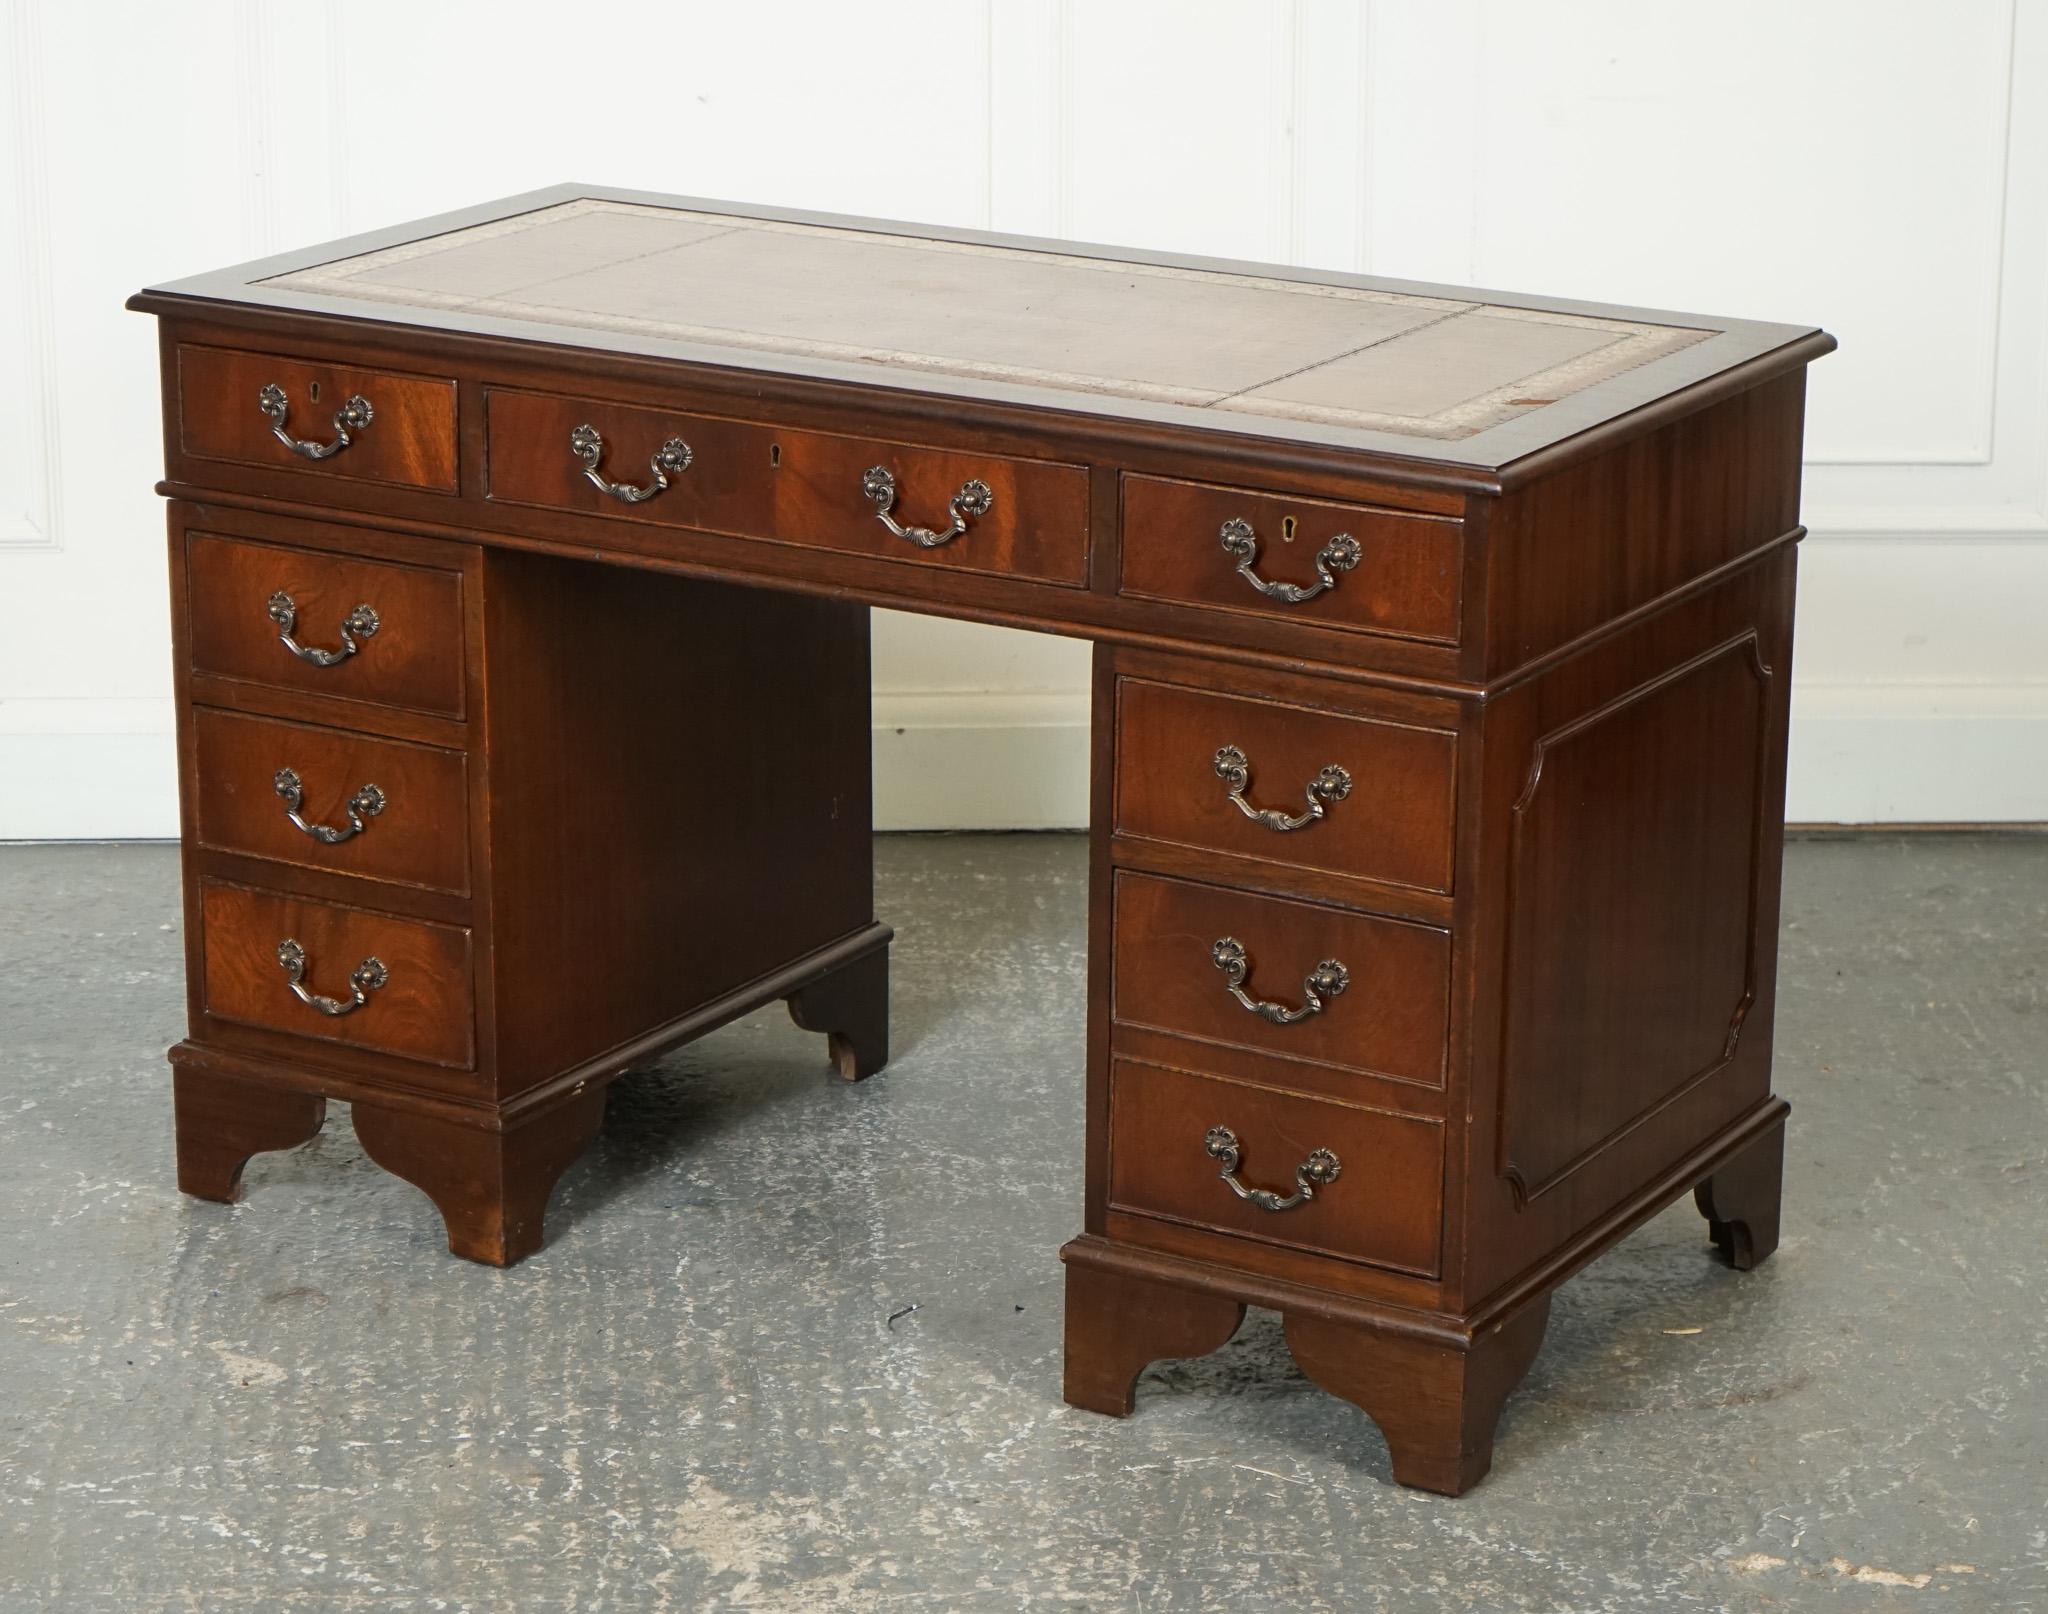 Antiques of London



We are delighted to offer for sale this Lovely Vintage Desk With Embossed Brown Leather Desk.

A vintage desk with embossed brown leather brings elegance and sophistication to any office or study space. 
The focal point of this